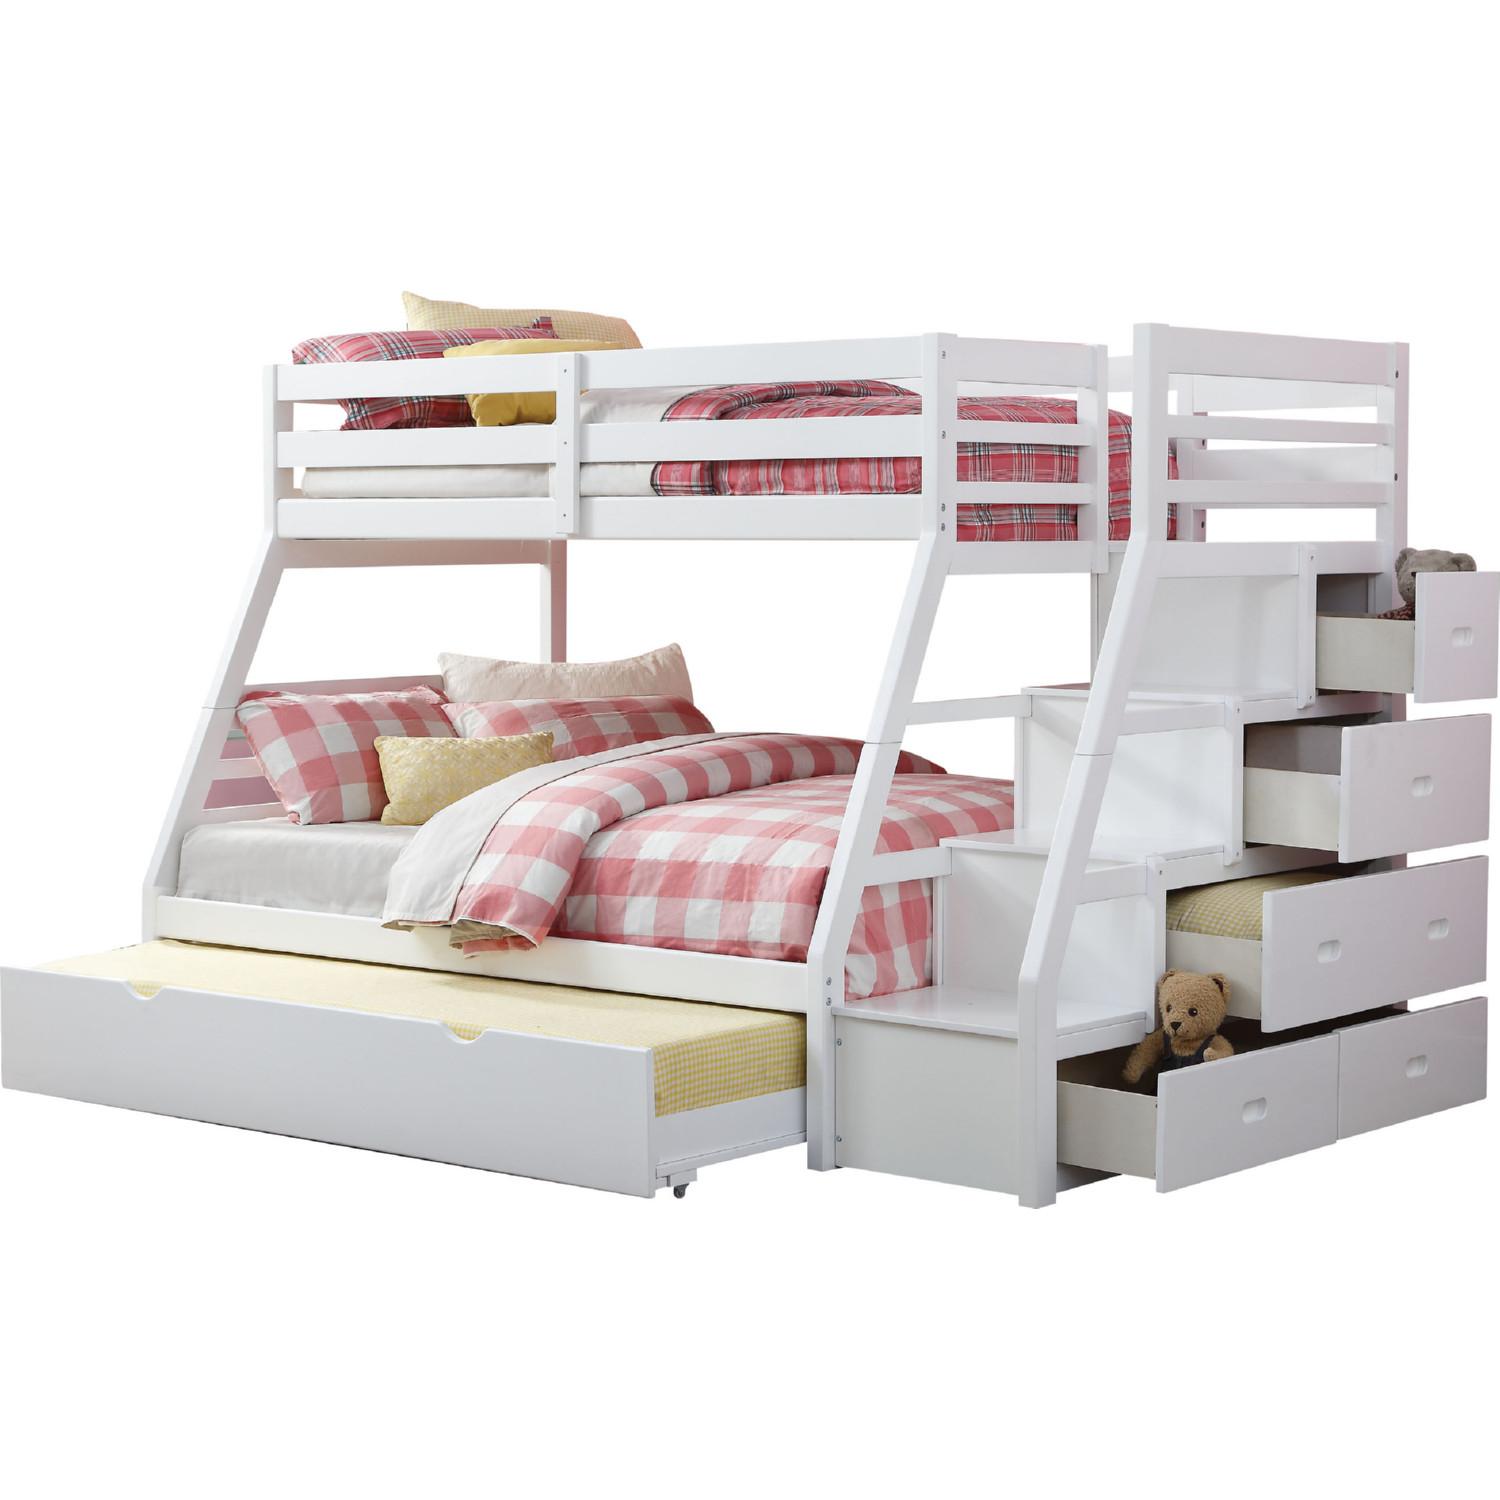 

    
Transitional White Twin/Full Bunk Bed by Acme Jason 37105
